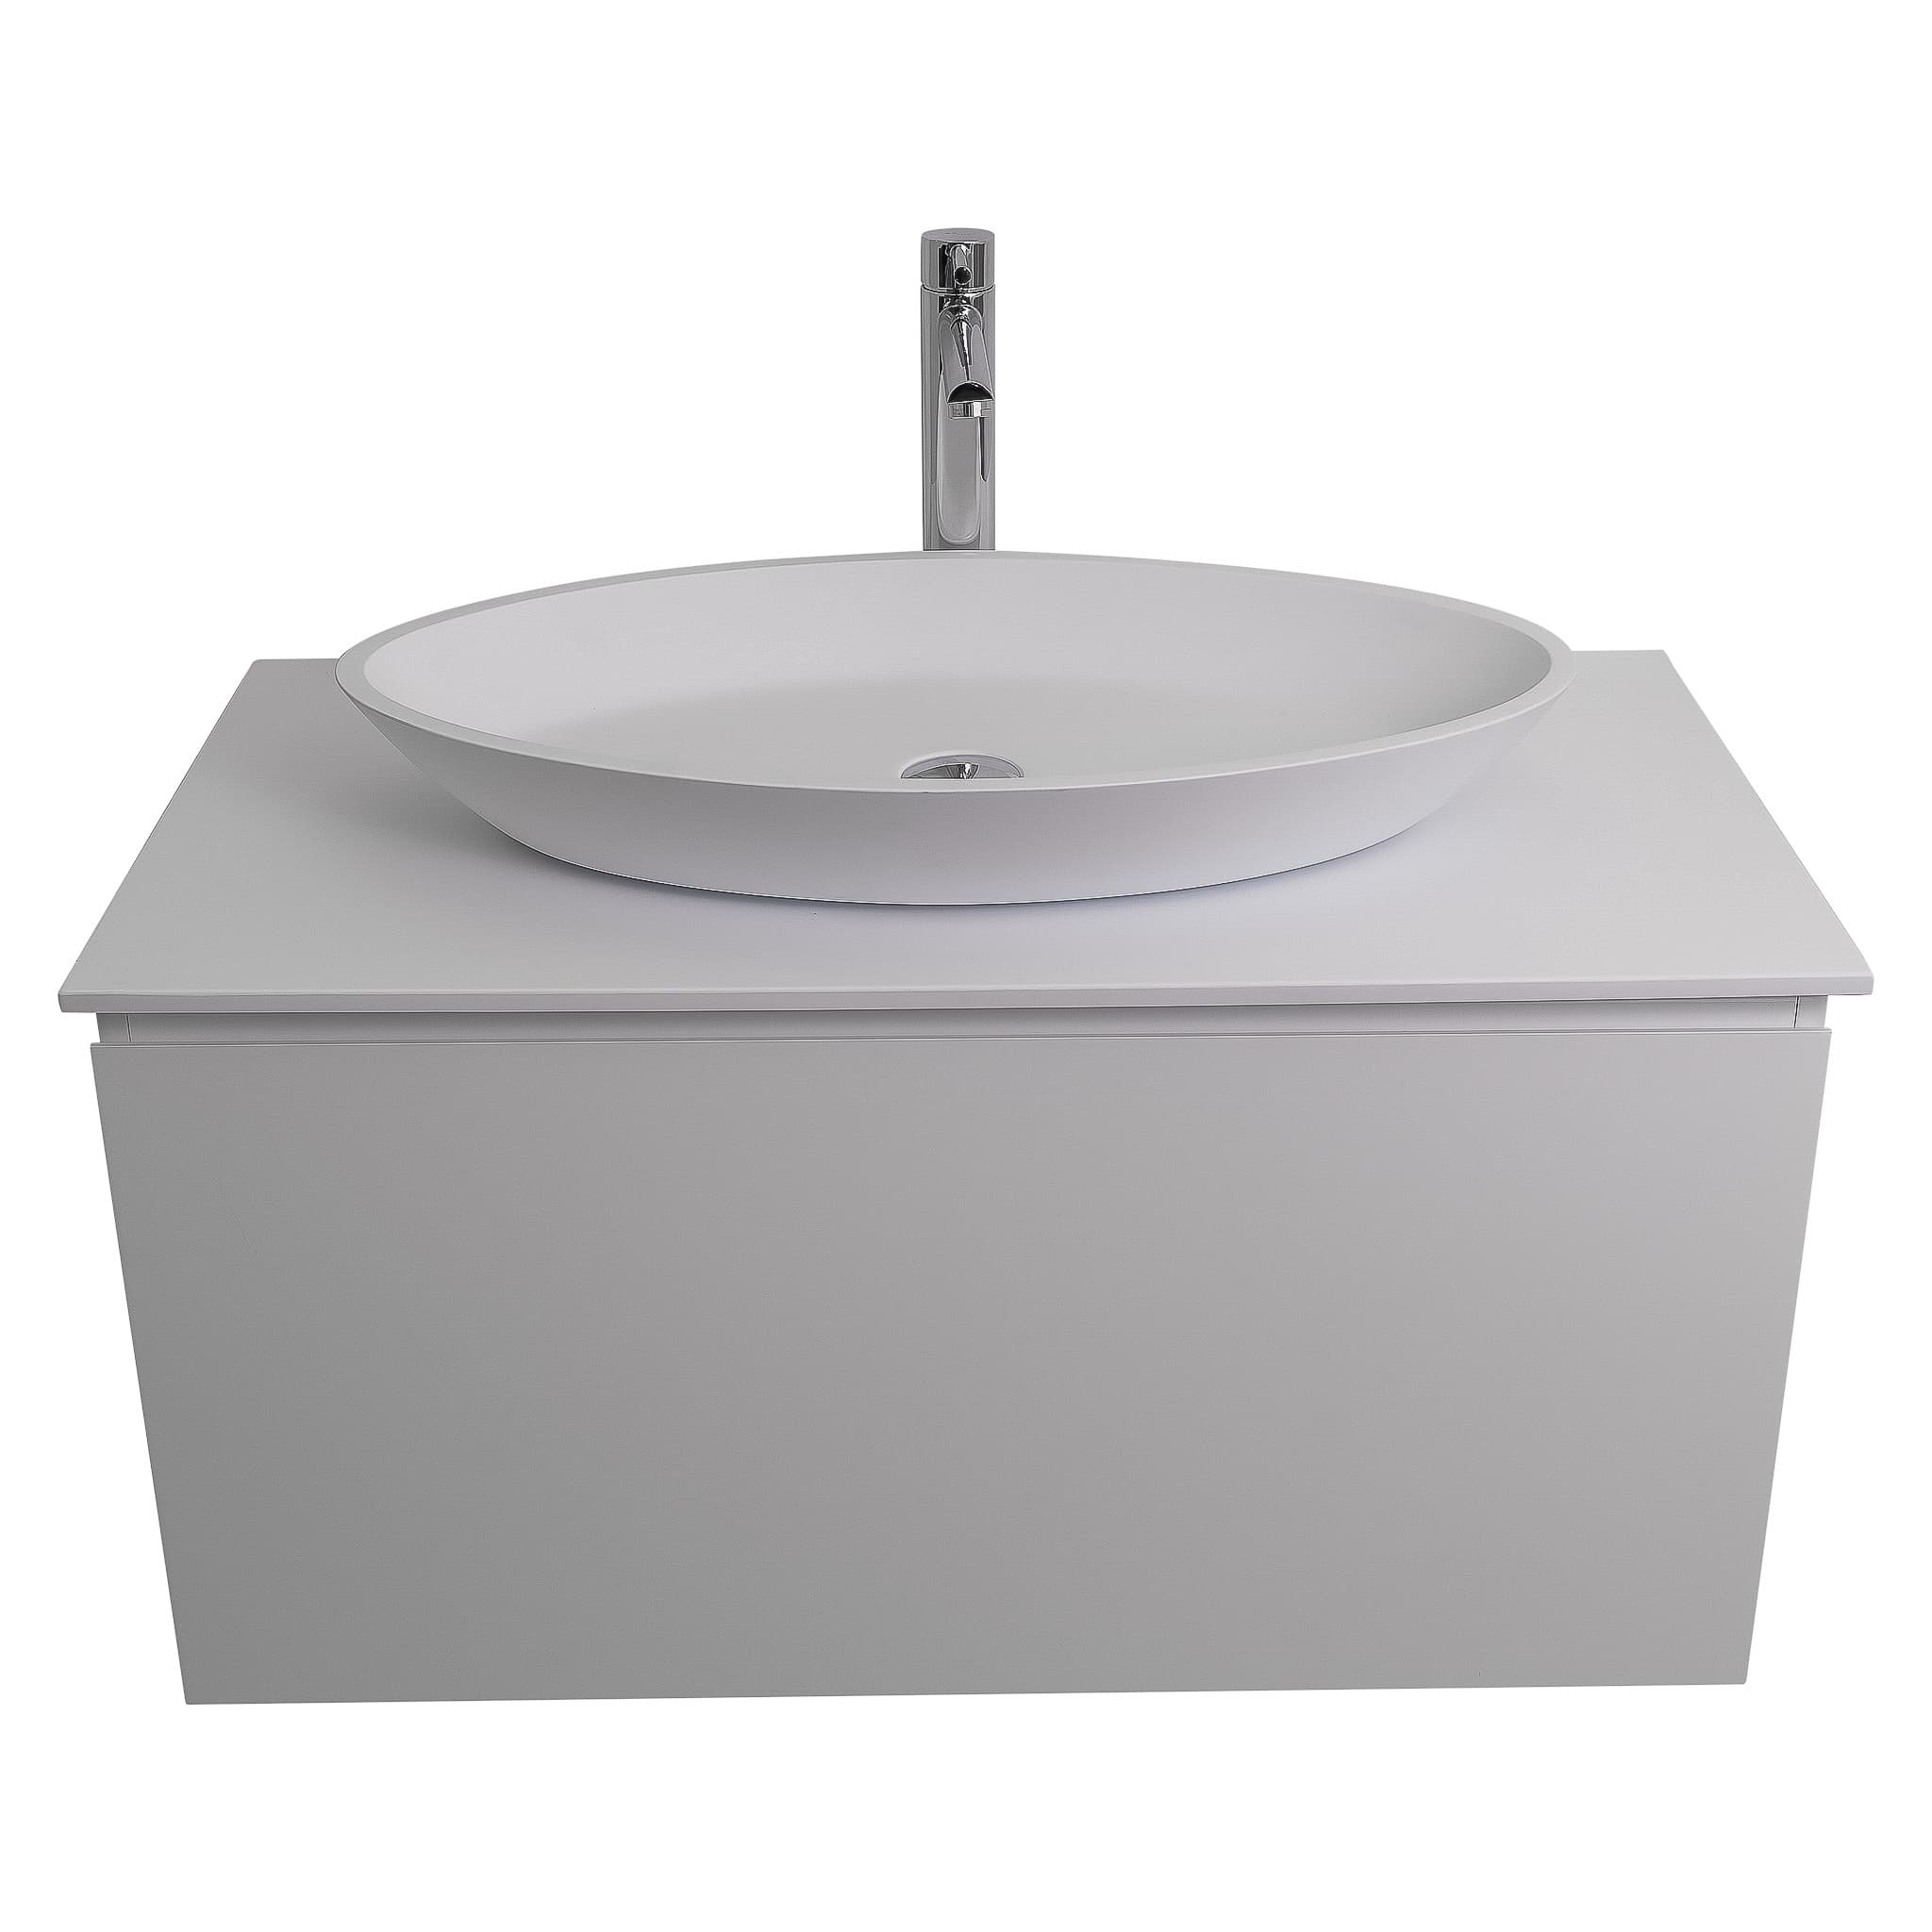 Venice 31.5 White High Gloss Cabinet, Solid Surface Flat White Counter And Oval Solid Surface White Basin 1305, Wall Mounted Modern Vanity Set